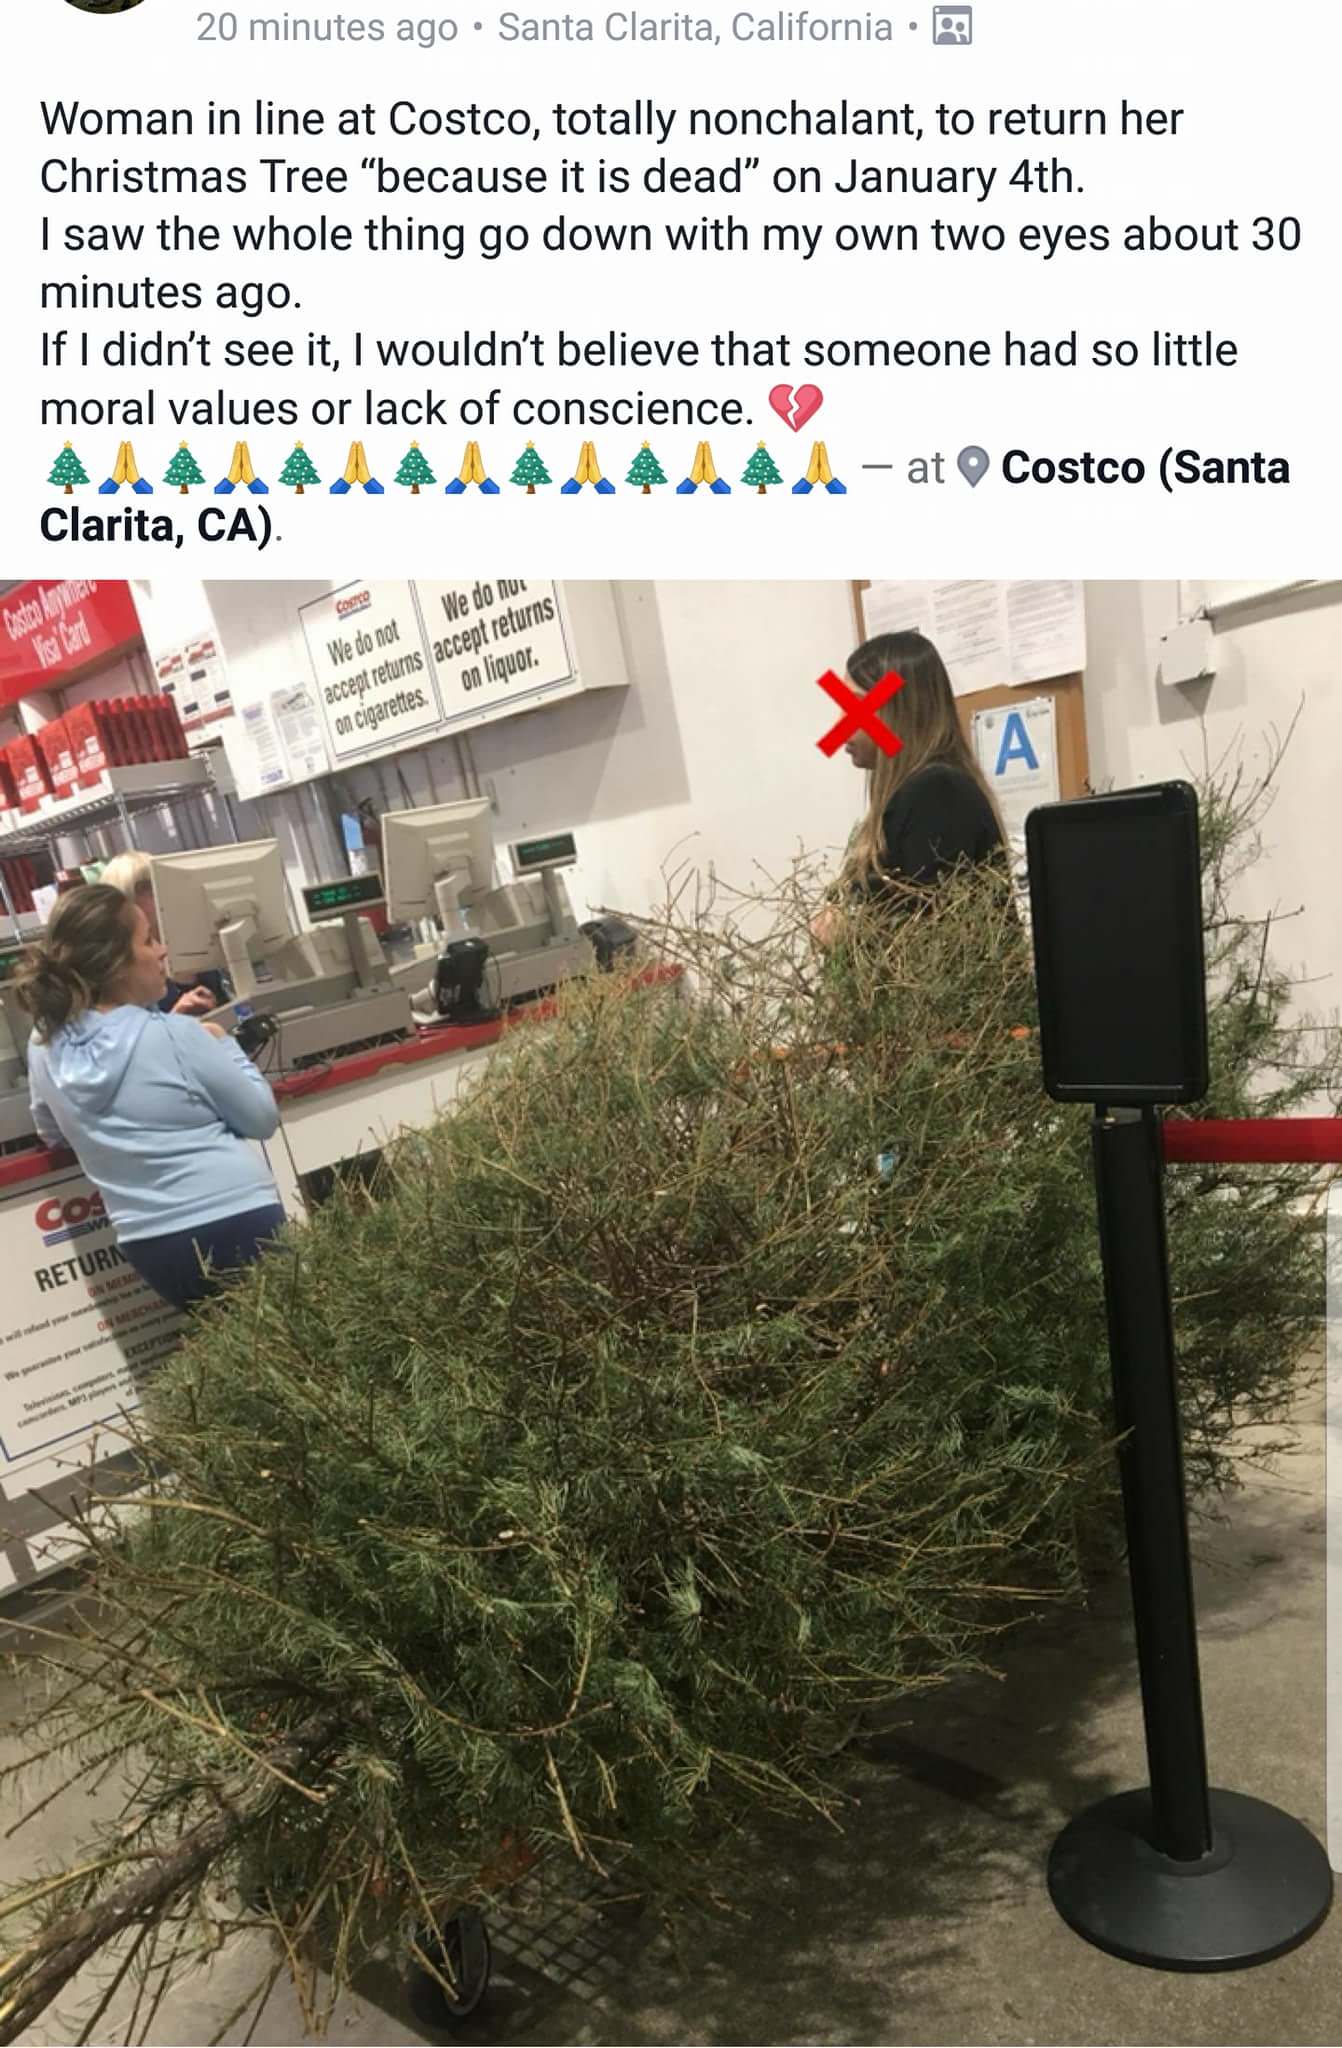 costco christmas tree return - 20 minutes ago Santa Clarita, California Woman in line at Costco, totally nonchalant, to return her Christmas Tree because it is dead on January 4th. I saw the whole thing go down with my own two eyes about 30 minutes ago. I